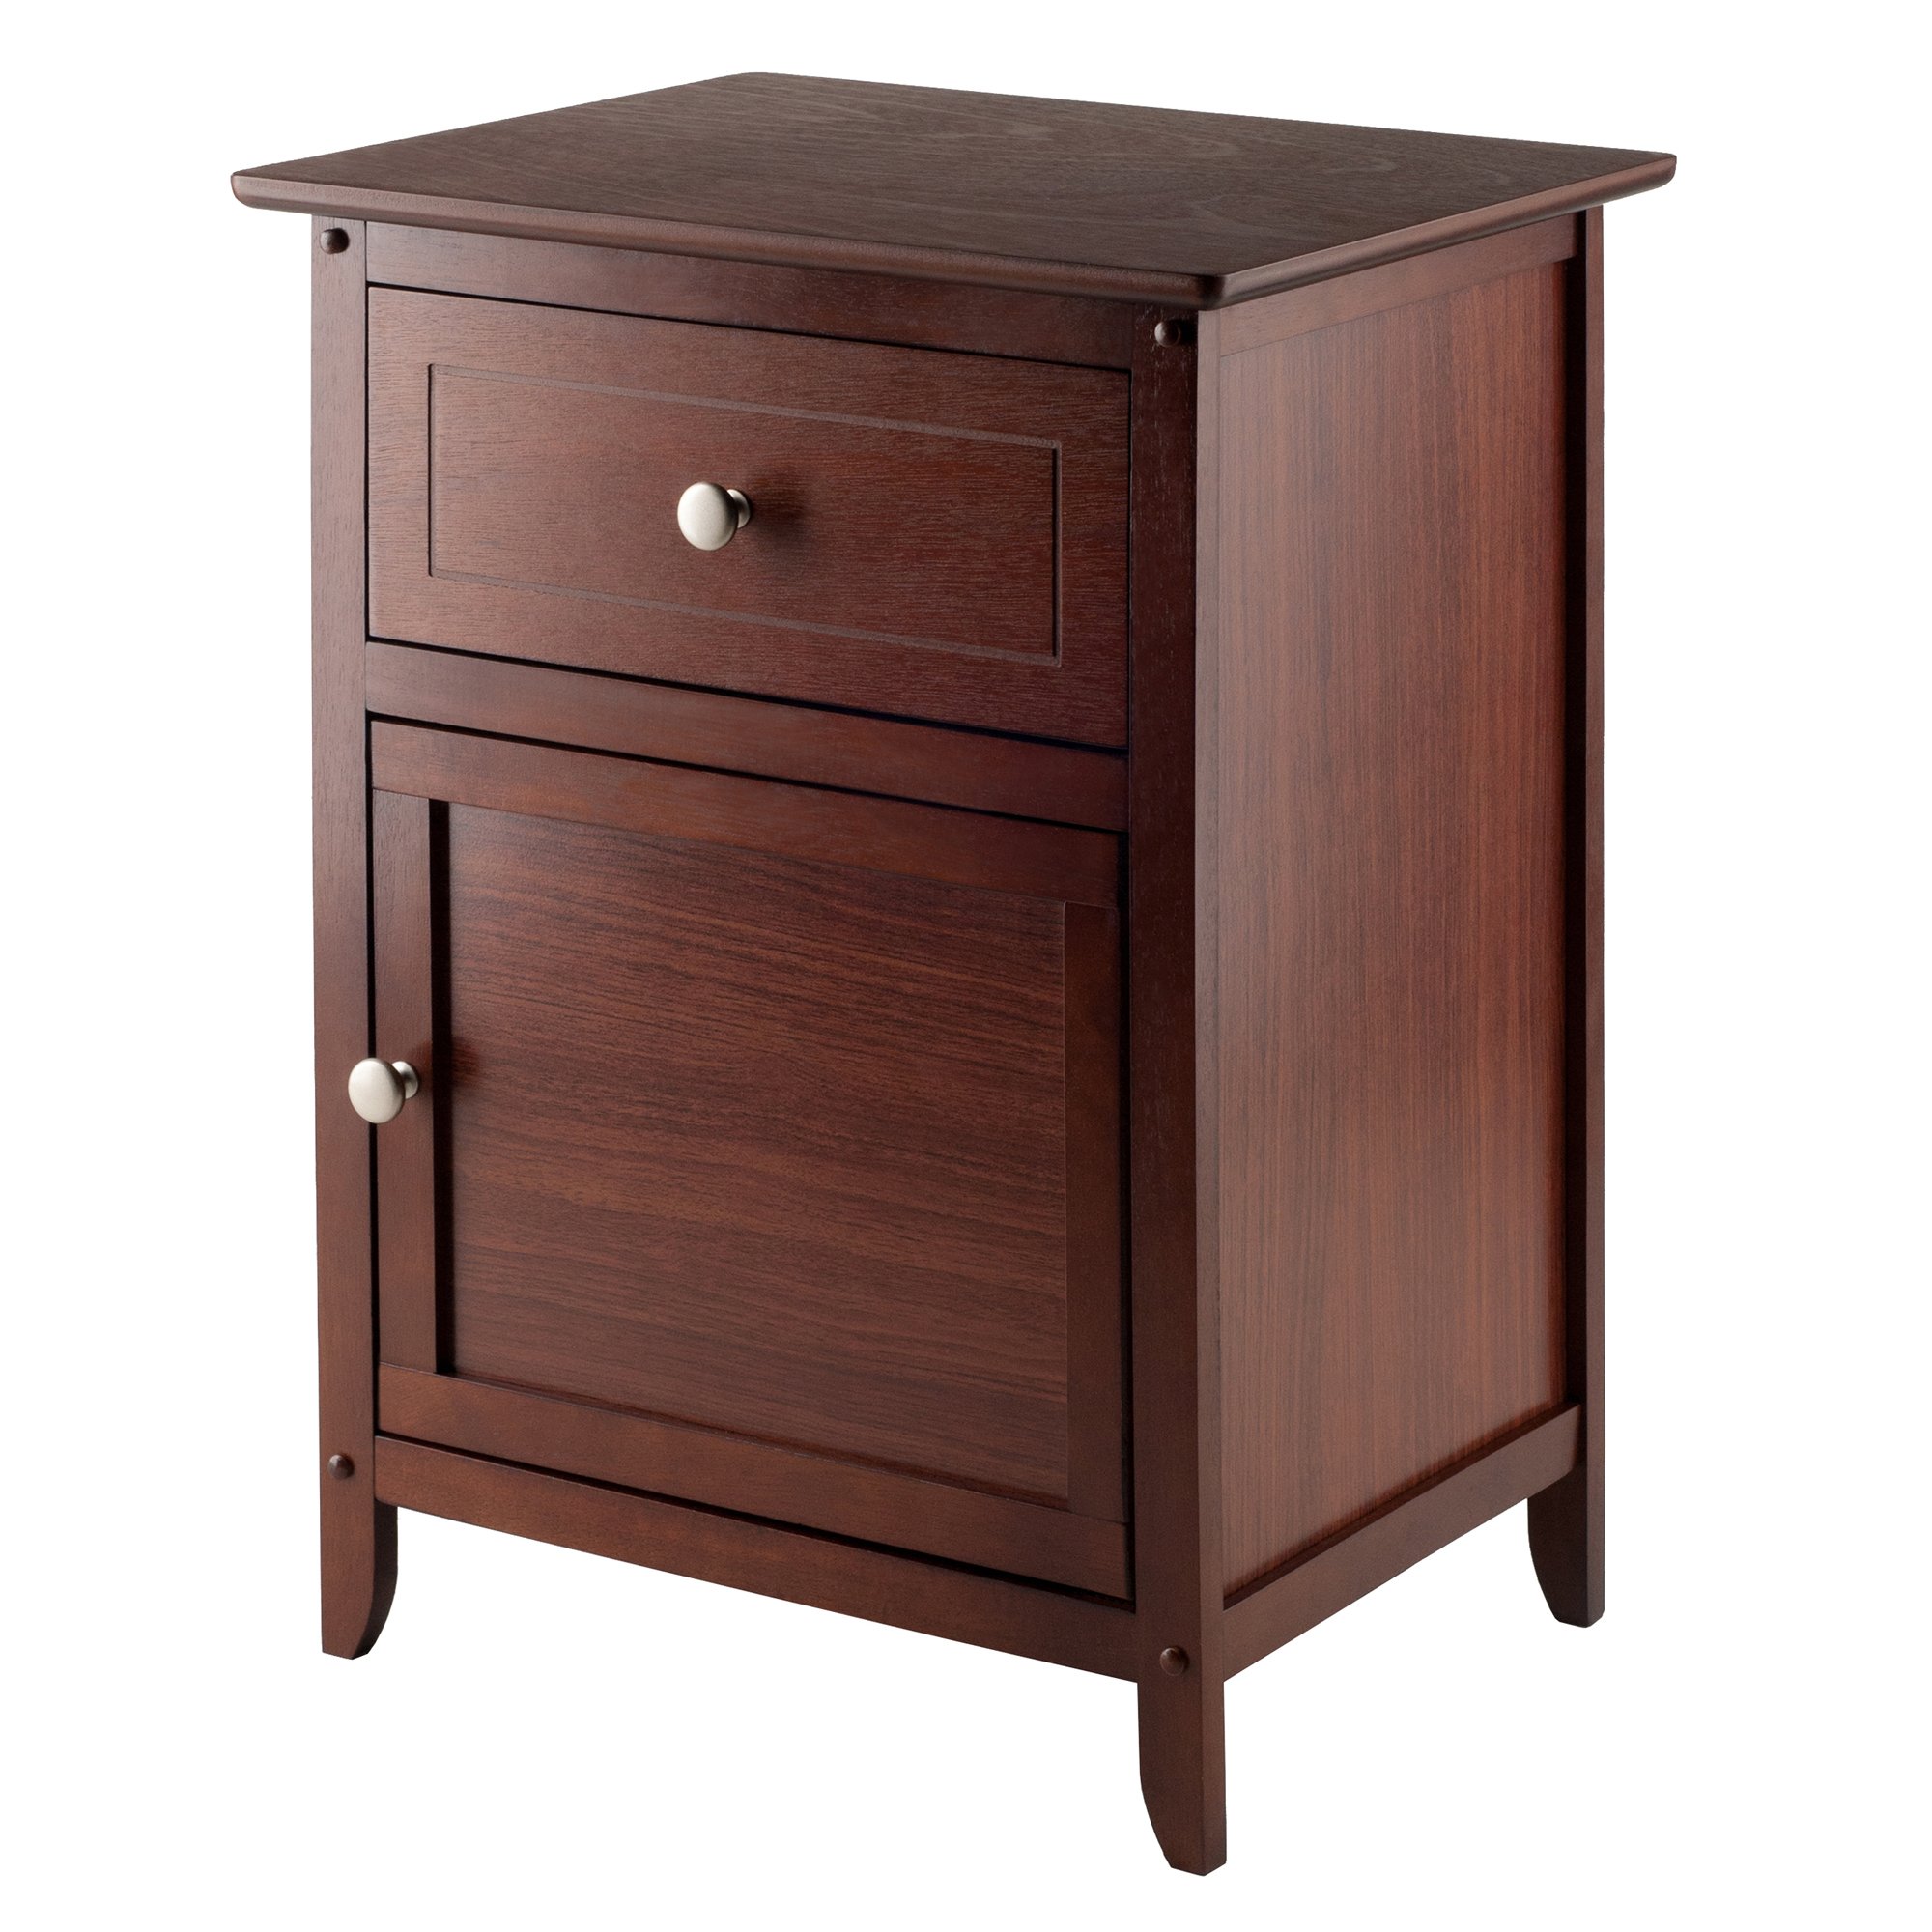 delightful accent table file cabinet round color tables living and end side sofa top redmon painting kijiji shades under ott tiffany lighting small wall plus target lamp gold